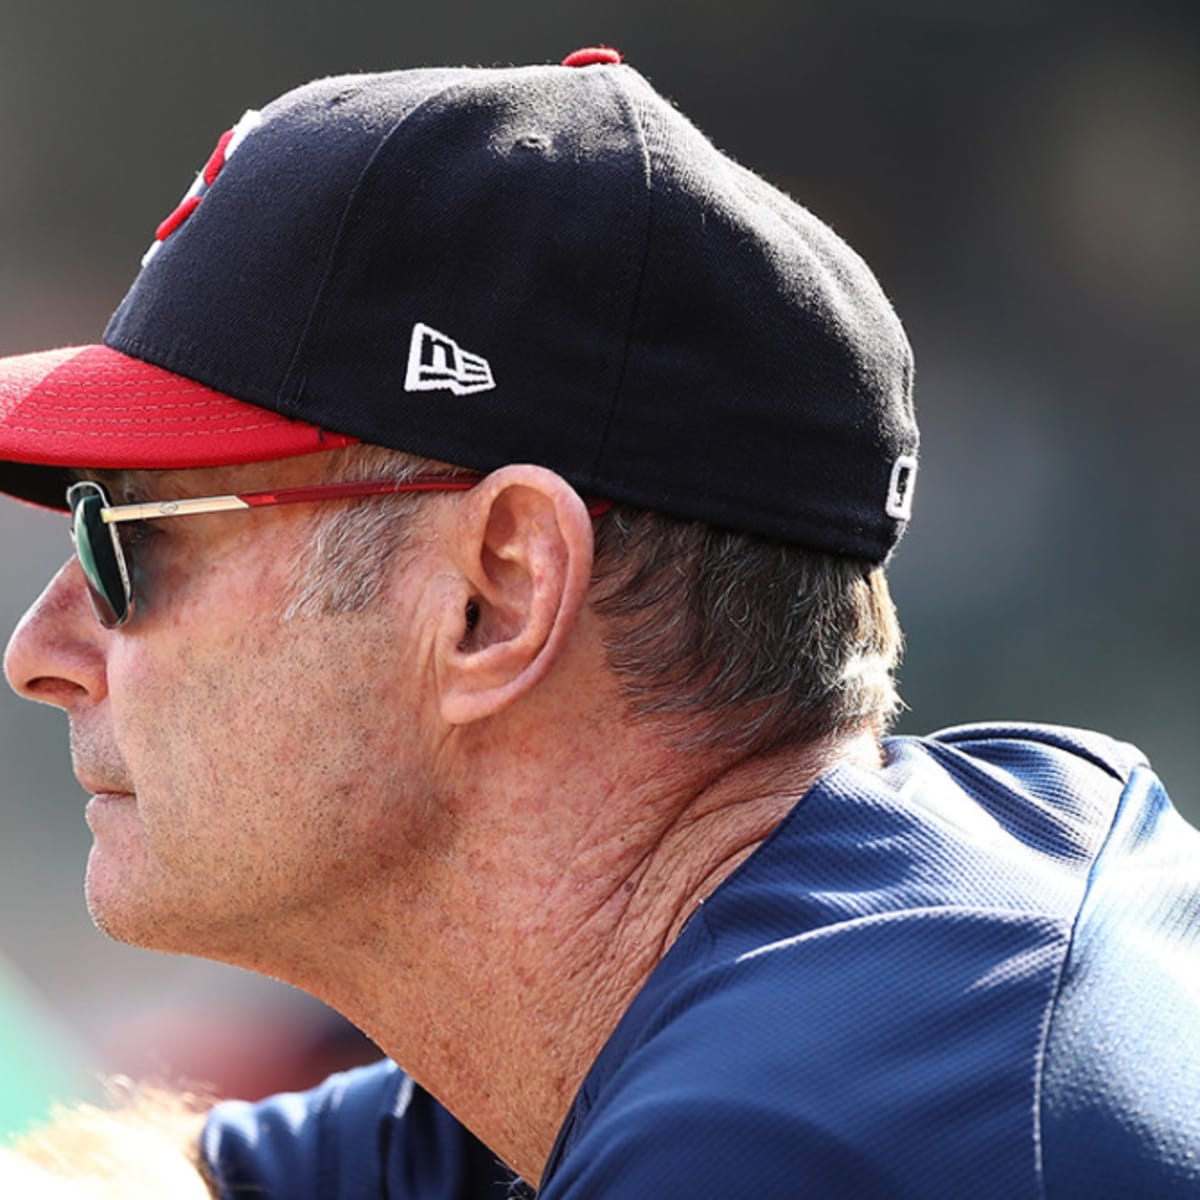 Twins name Paul Molitor next manager